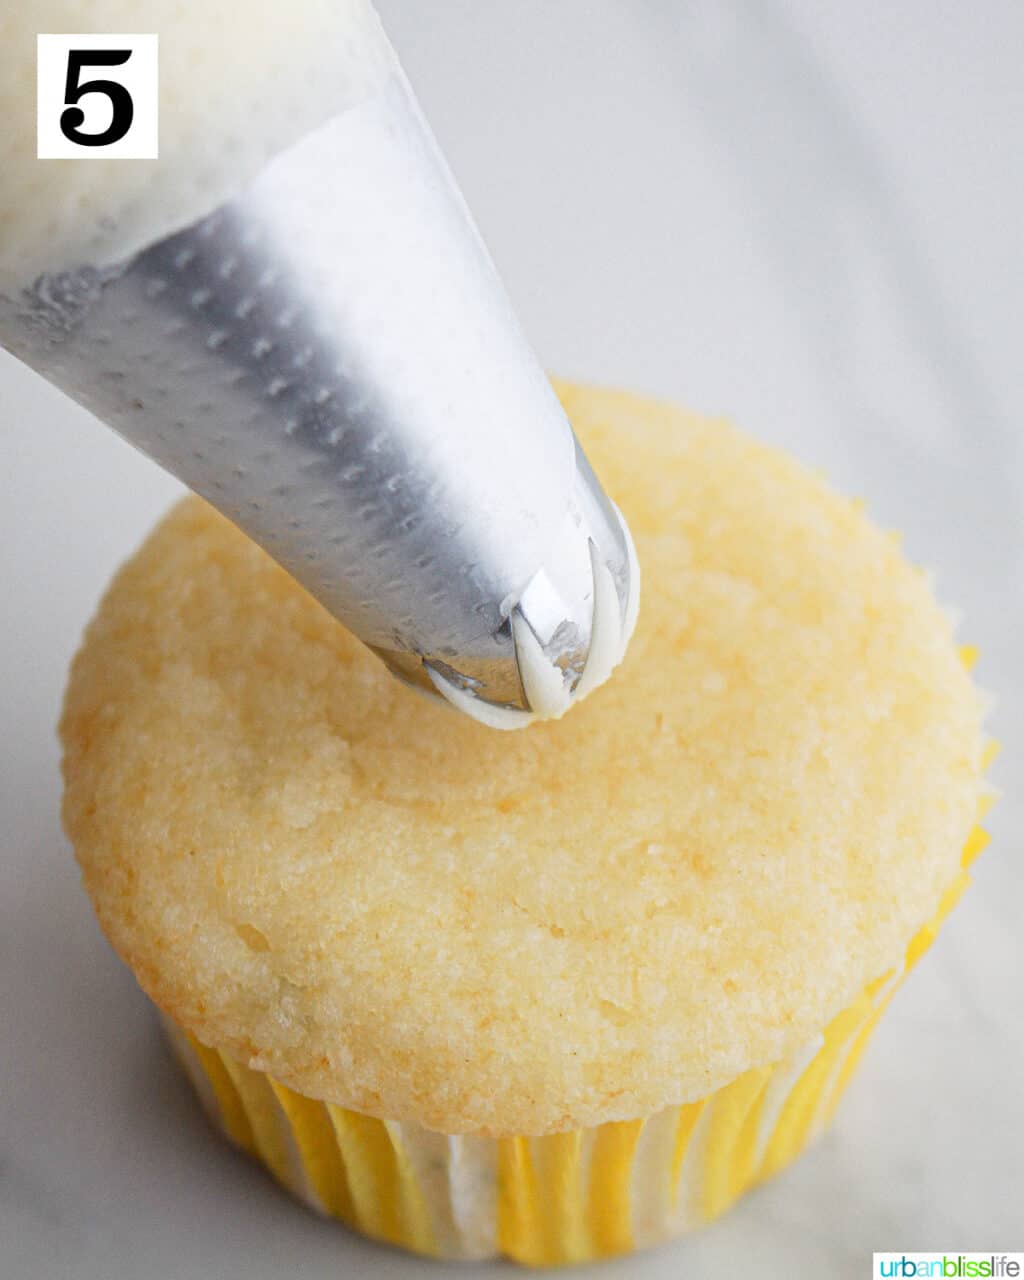 piping bag with frosting over a lemon basil cupcake.